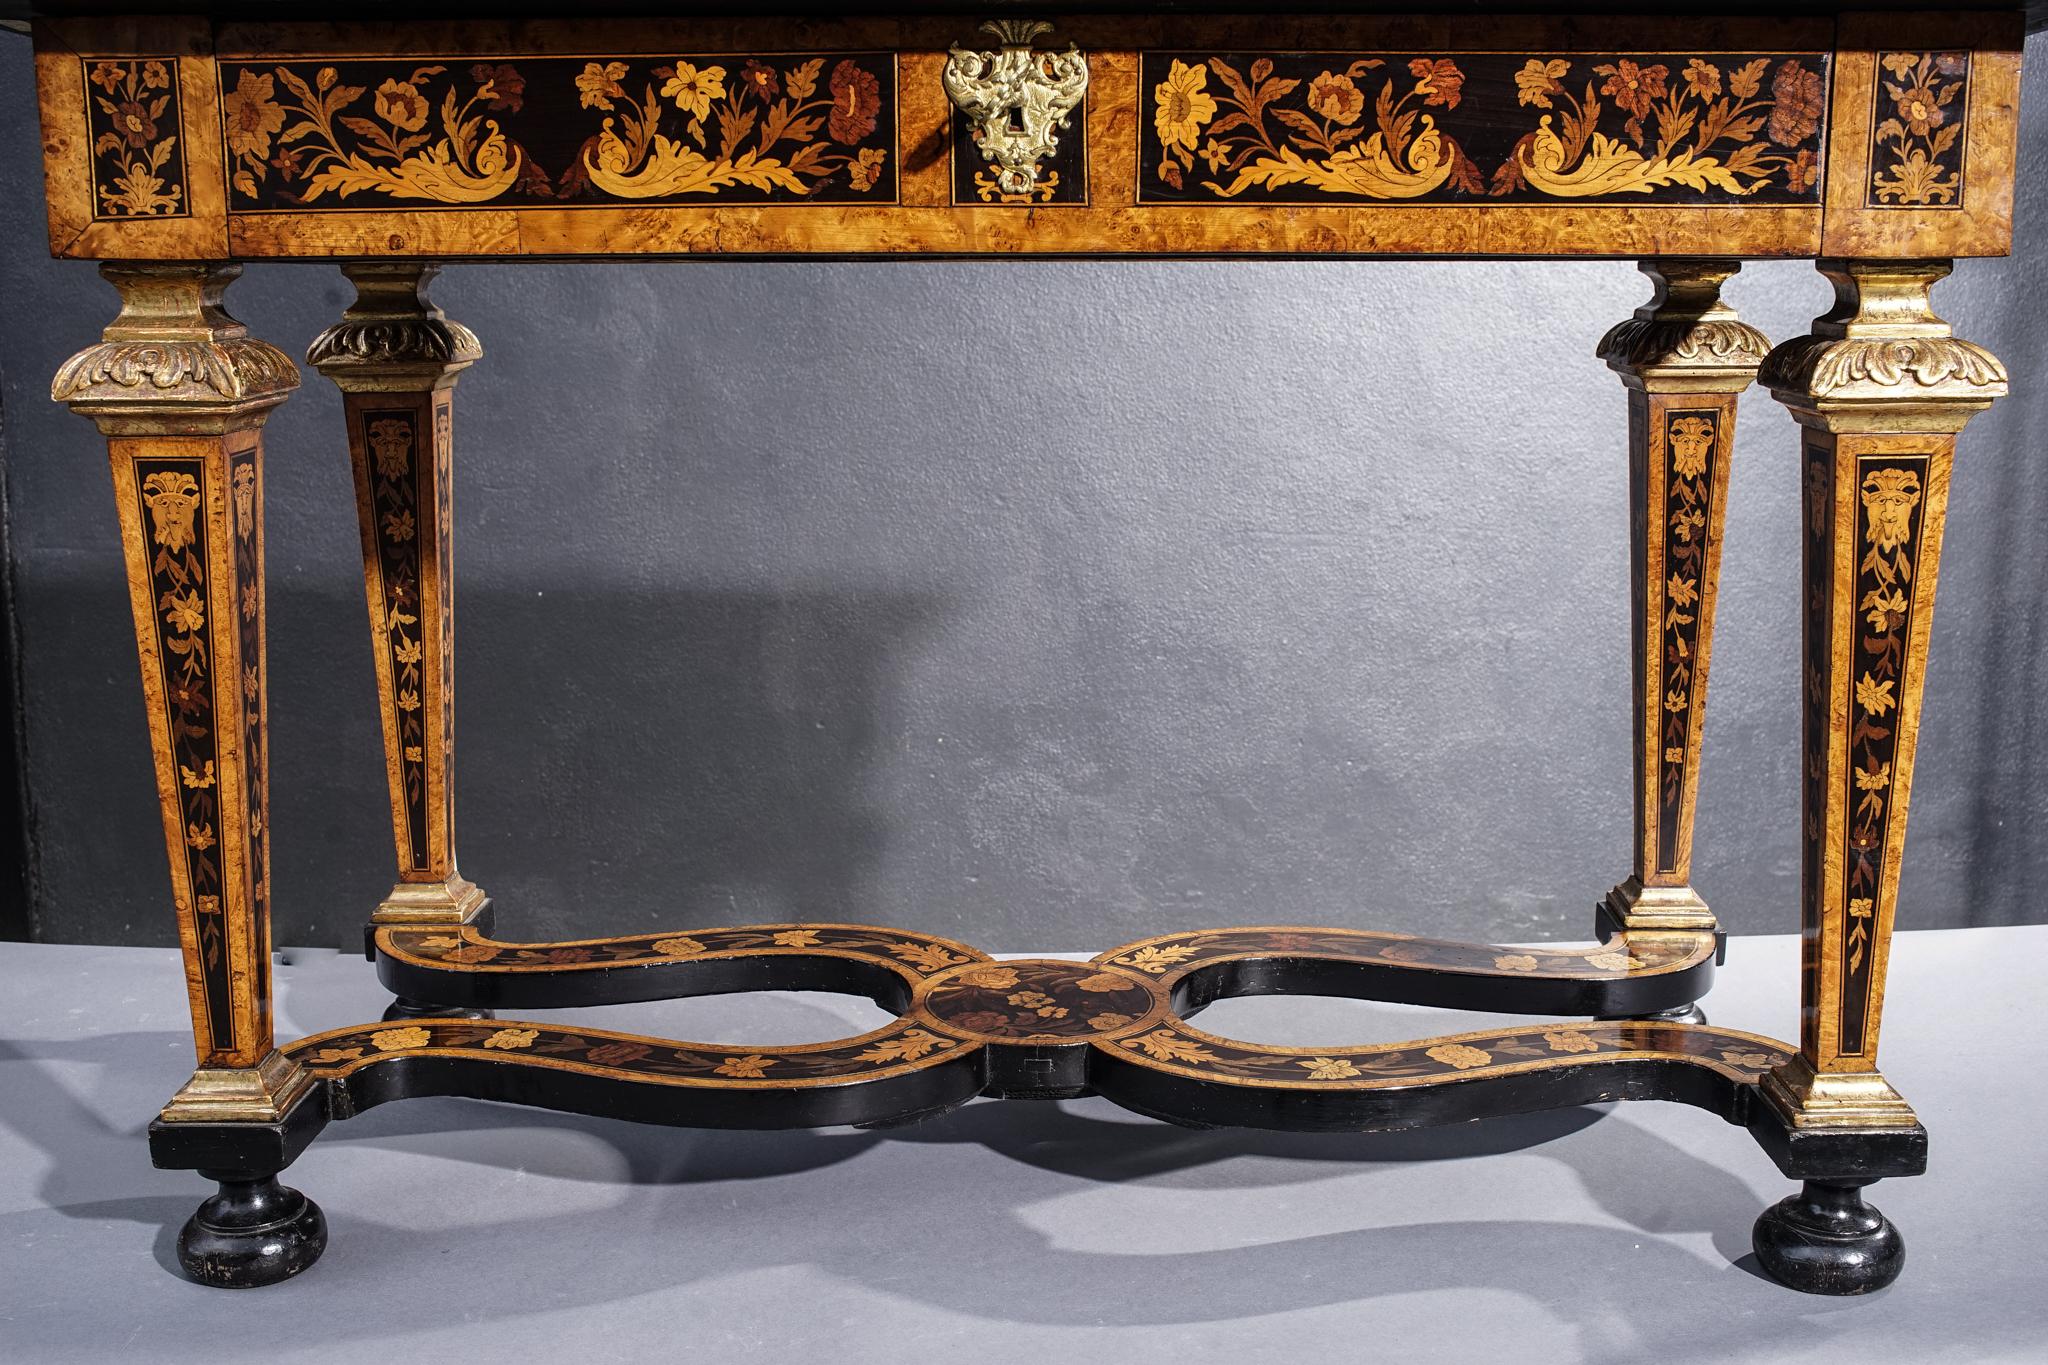 19th century English inlaid table with single drawer. In excellent condition for its age with carved giltwood details.